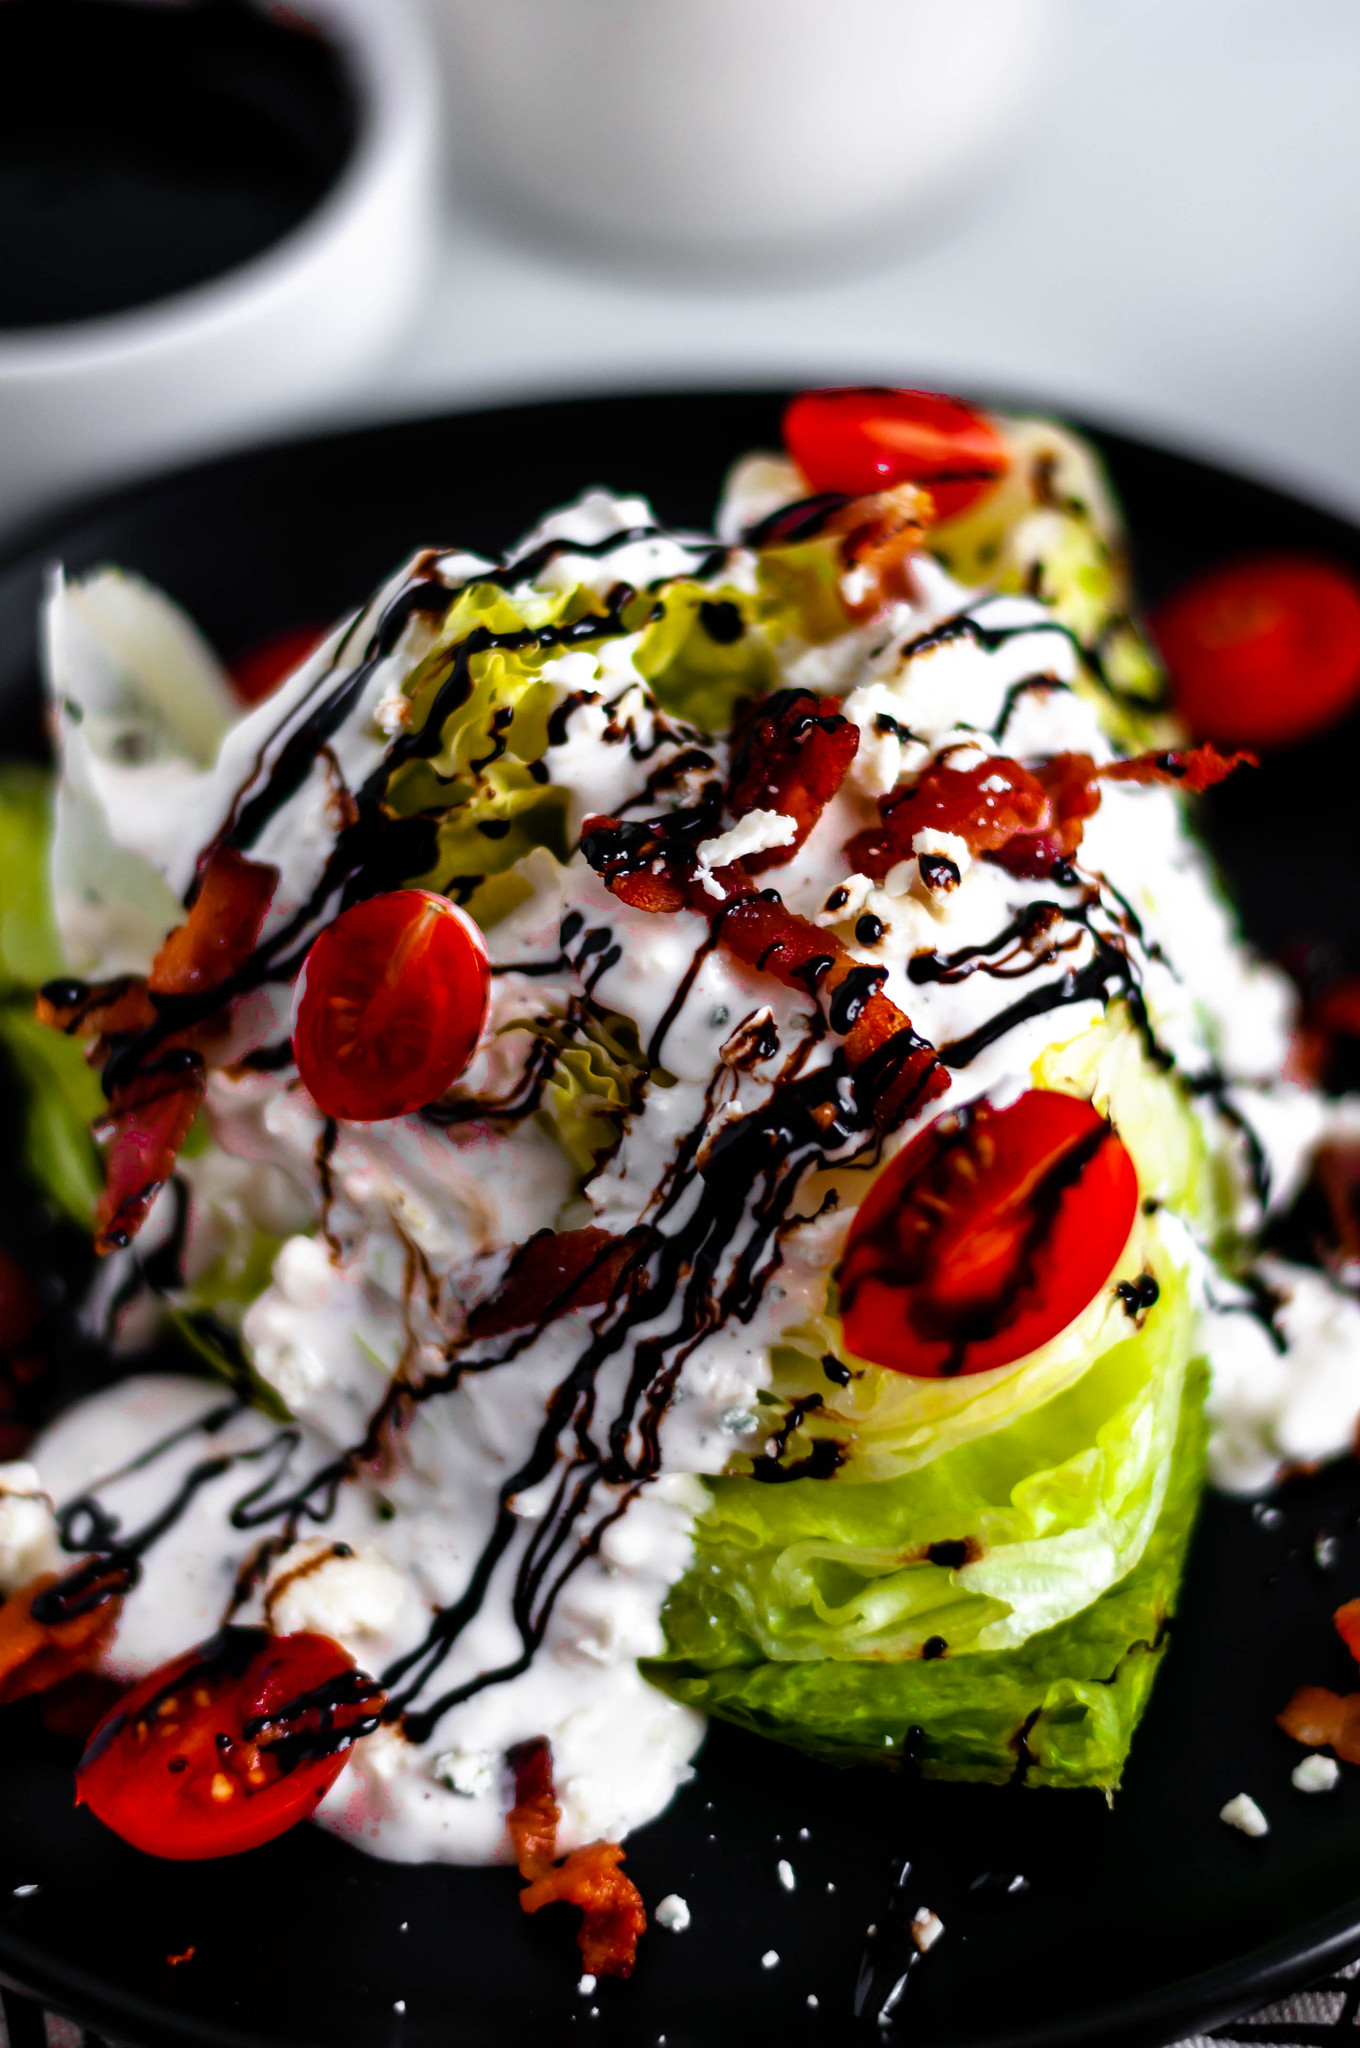 Start off any meal with this Classic Wedge Salad. Homemade blue cheese and a drizzle of balsamic glaze provide so much flavor to this classic salad.